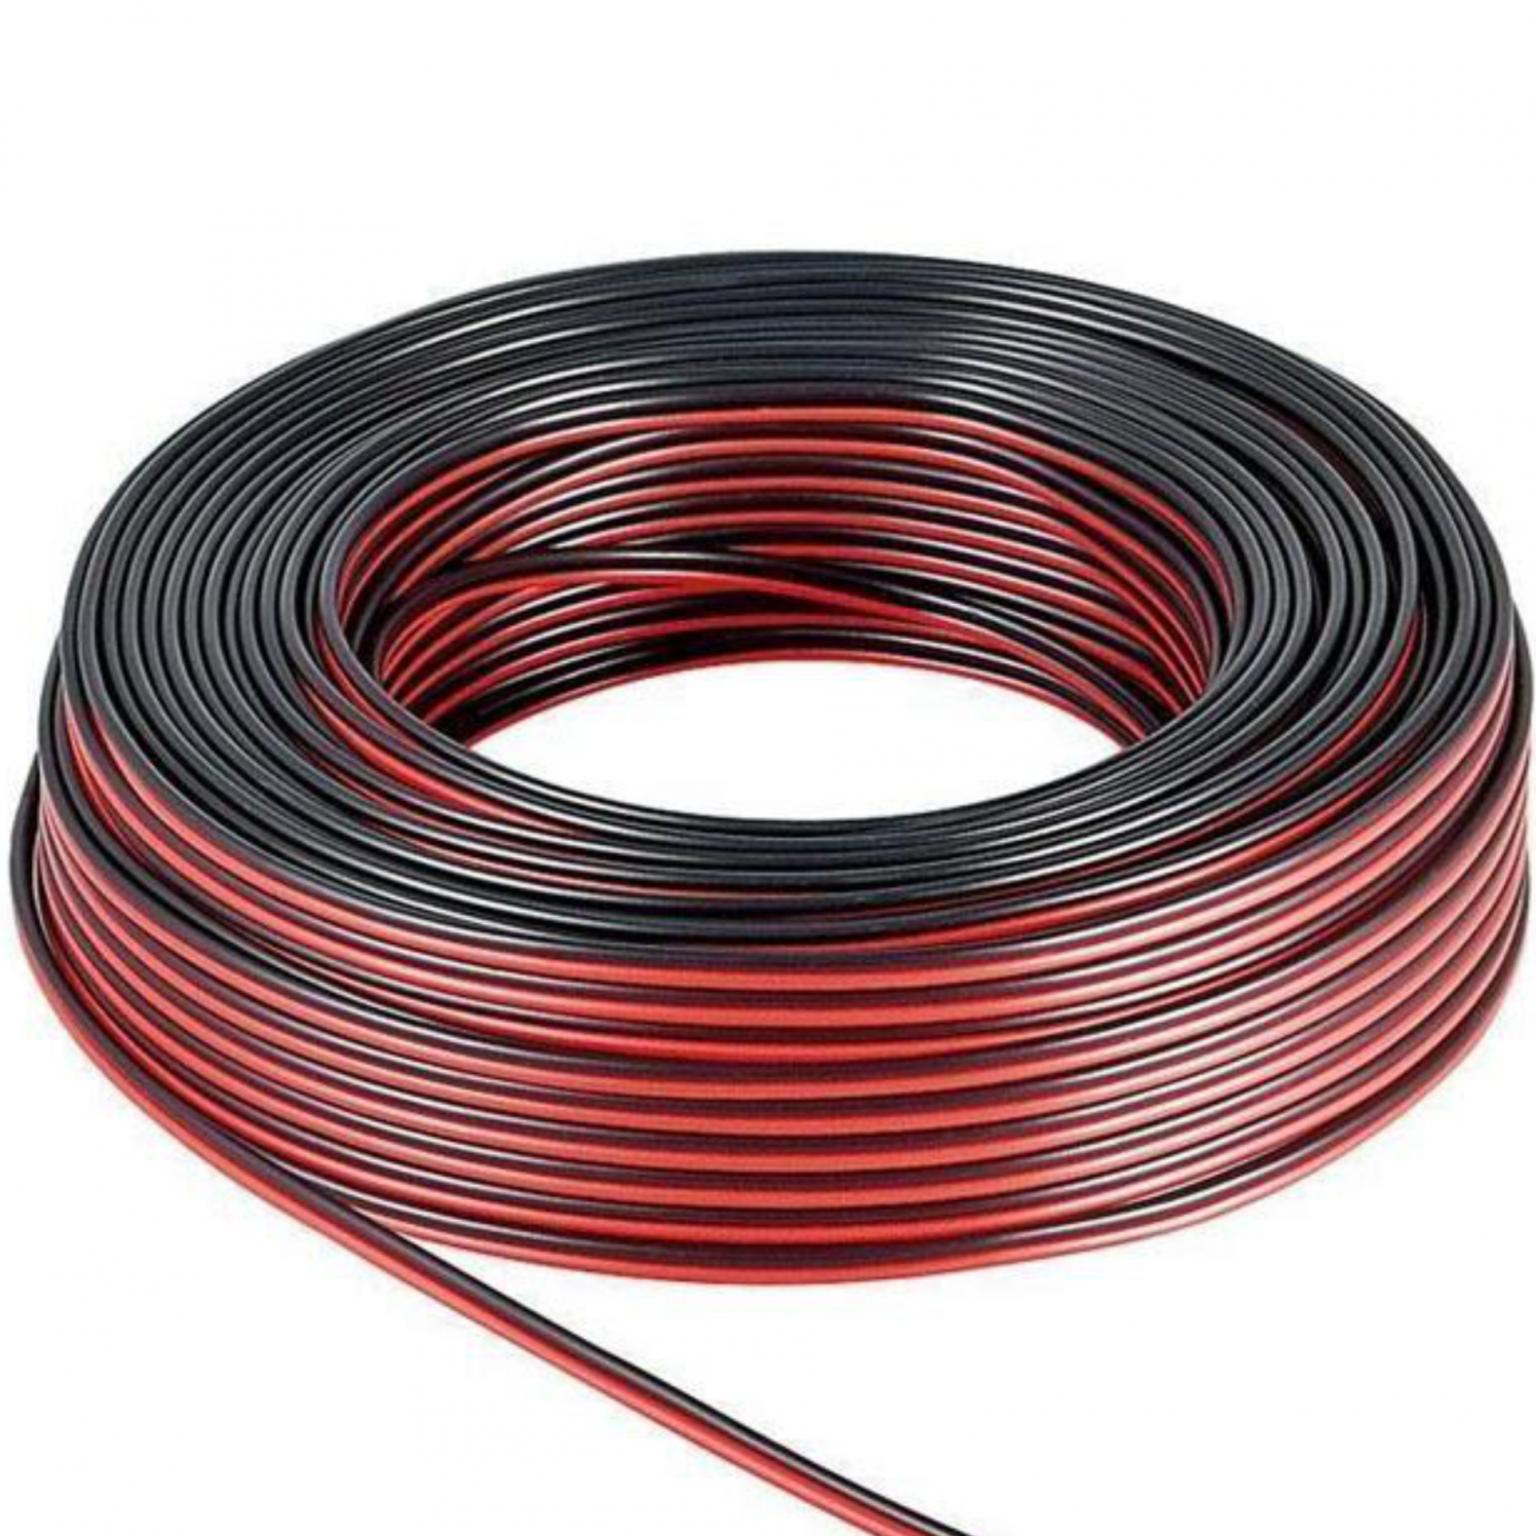 Image of Speaker cable red/black 10 m roll, cable diameter 2 x 1,5 mm? - Goobay